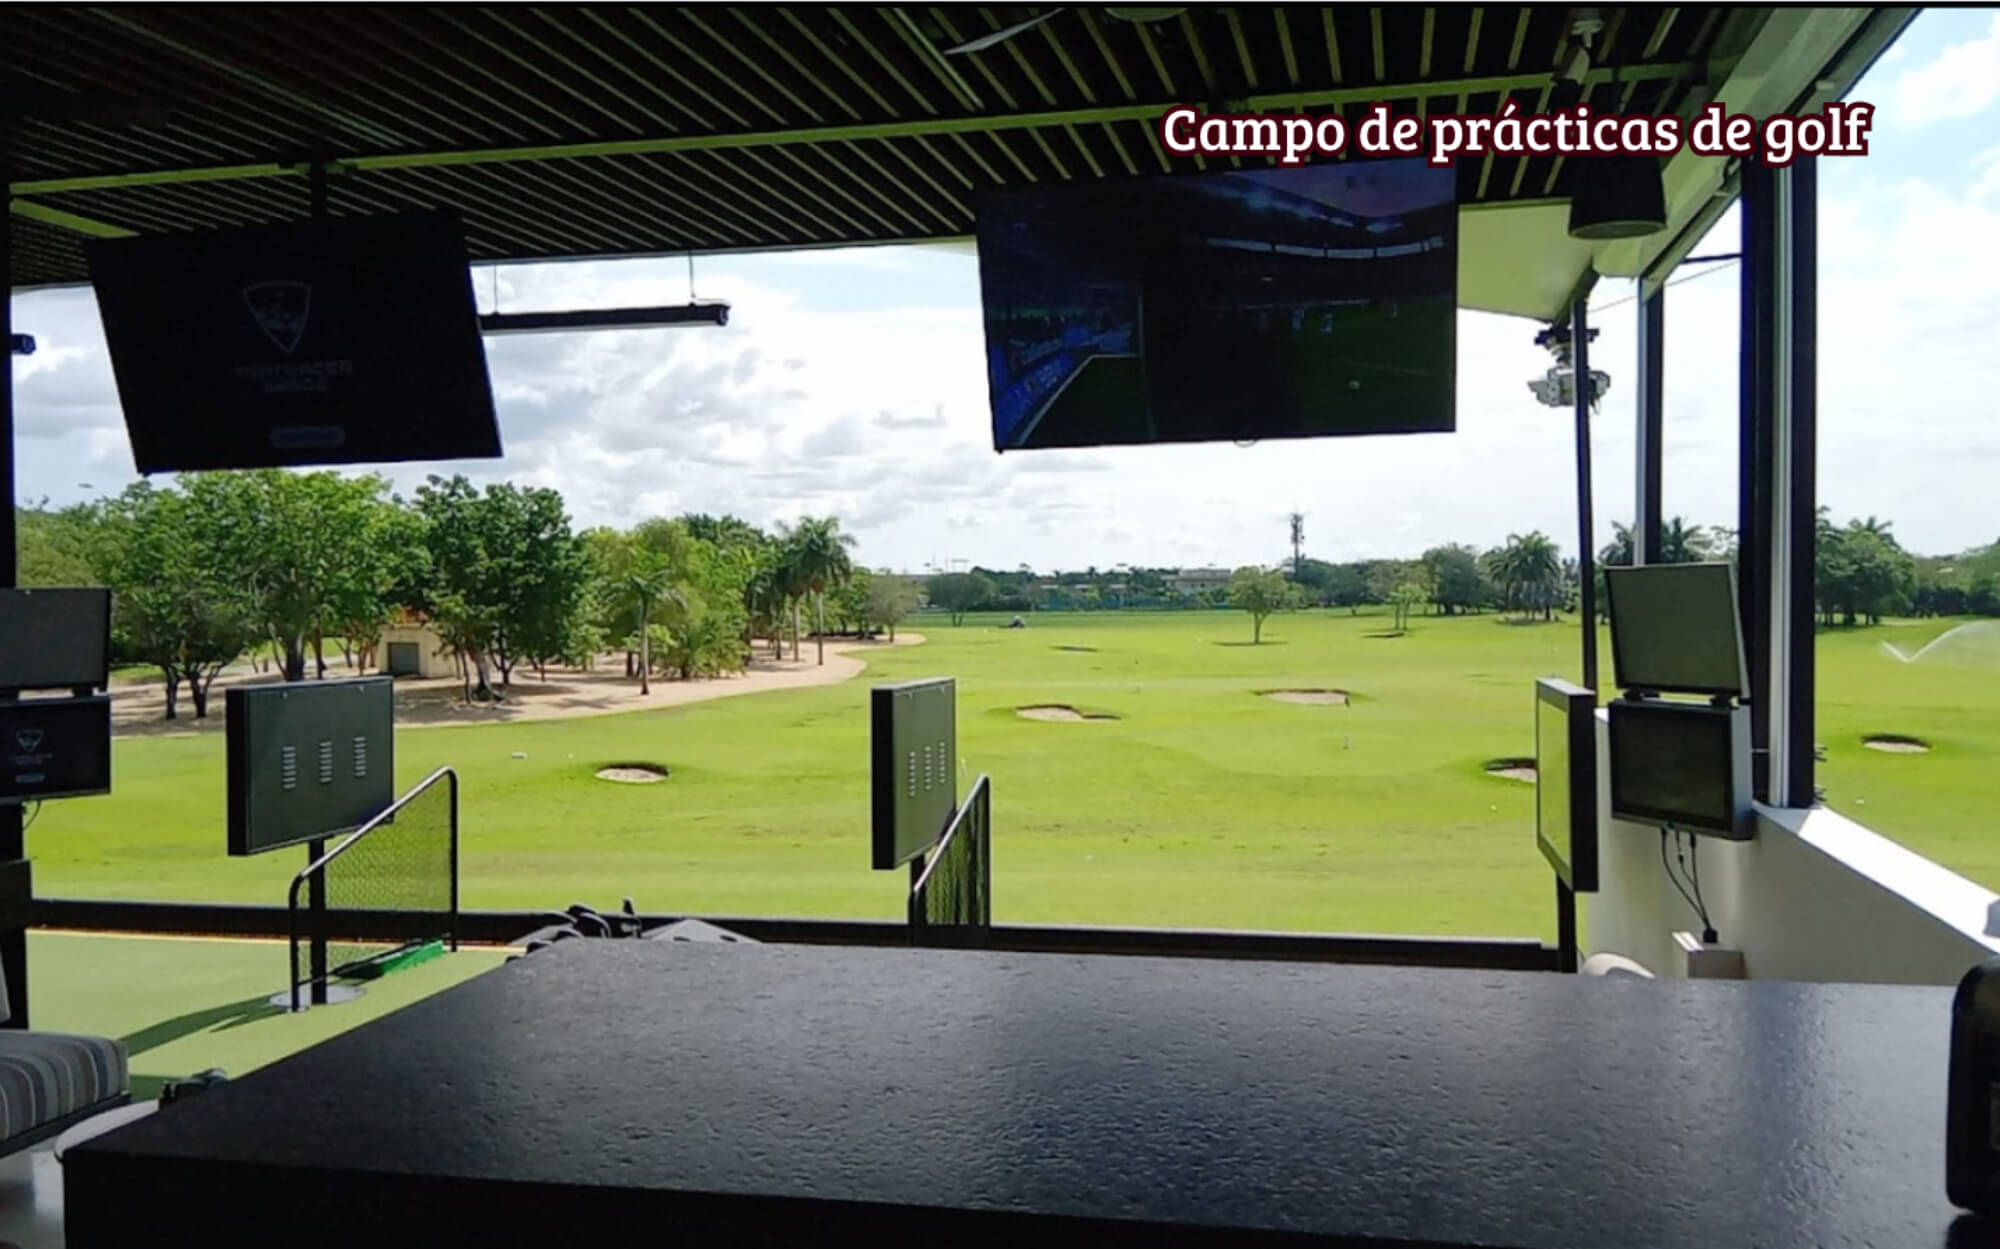 House with private pool in gated community with golf course and club house with exclusive amenities Yucatan Country Club, for sale in Mérida